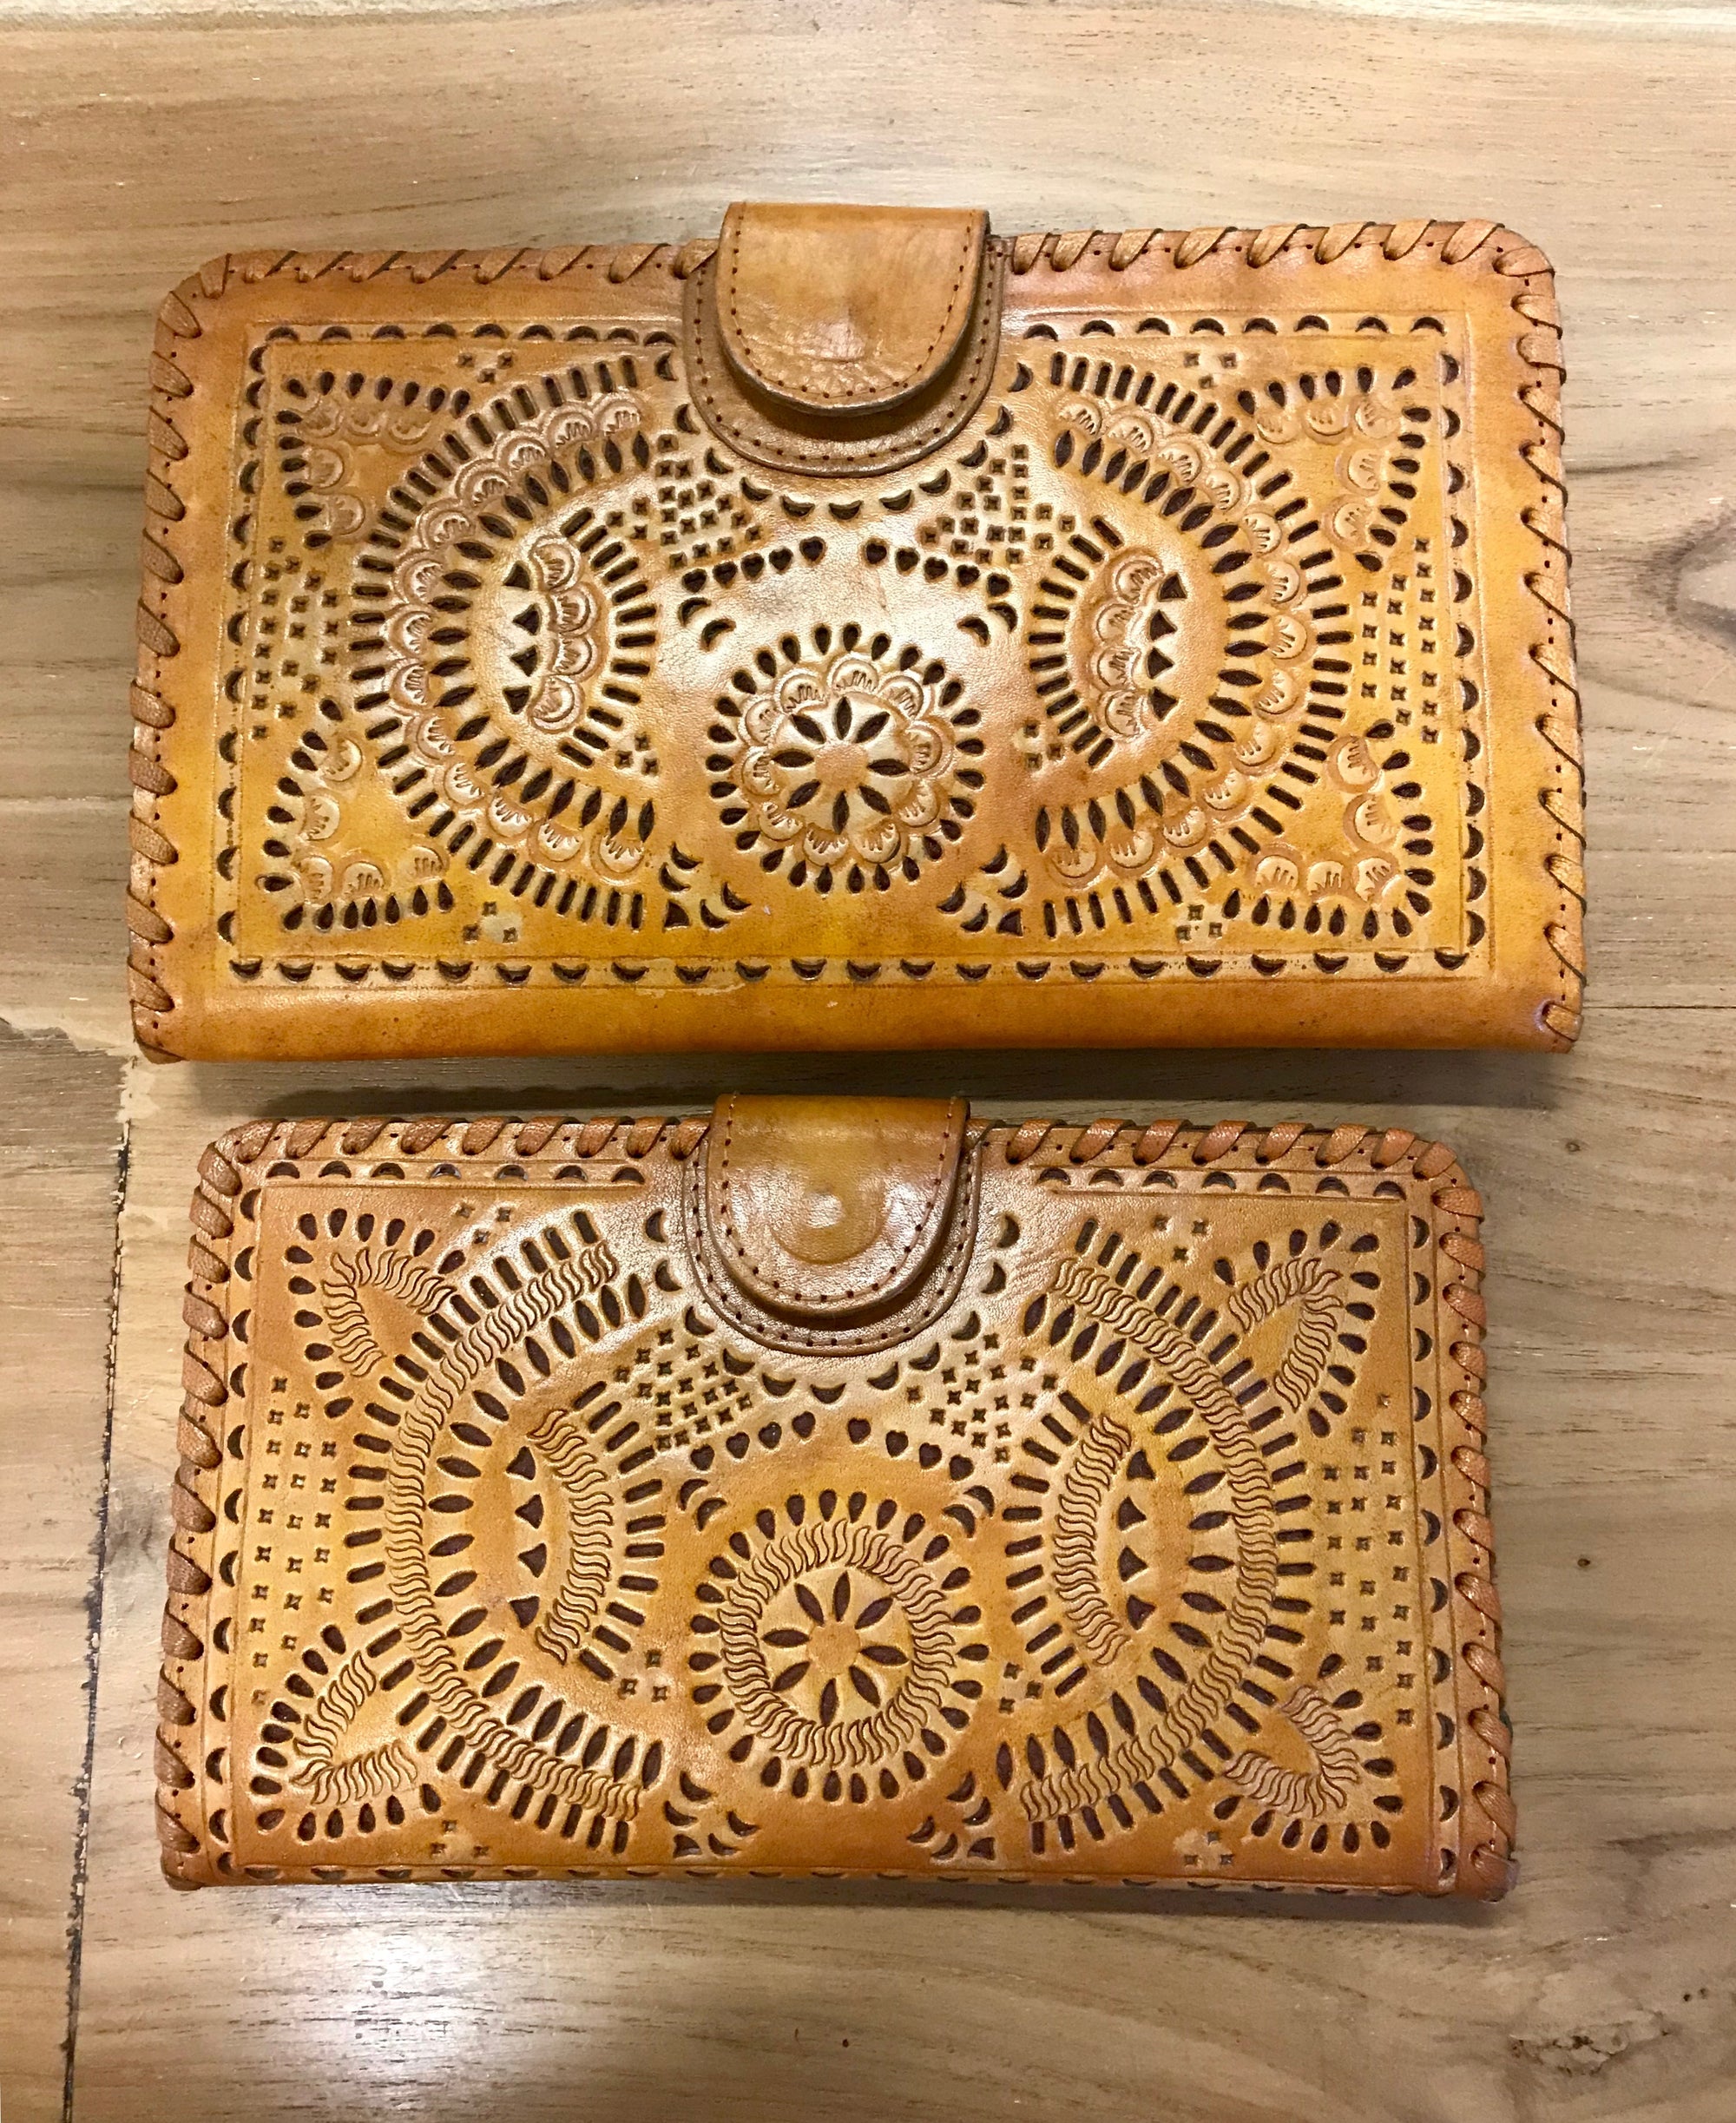 Purse Leather Emboss